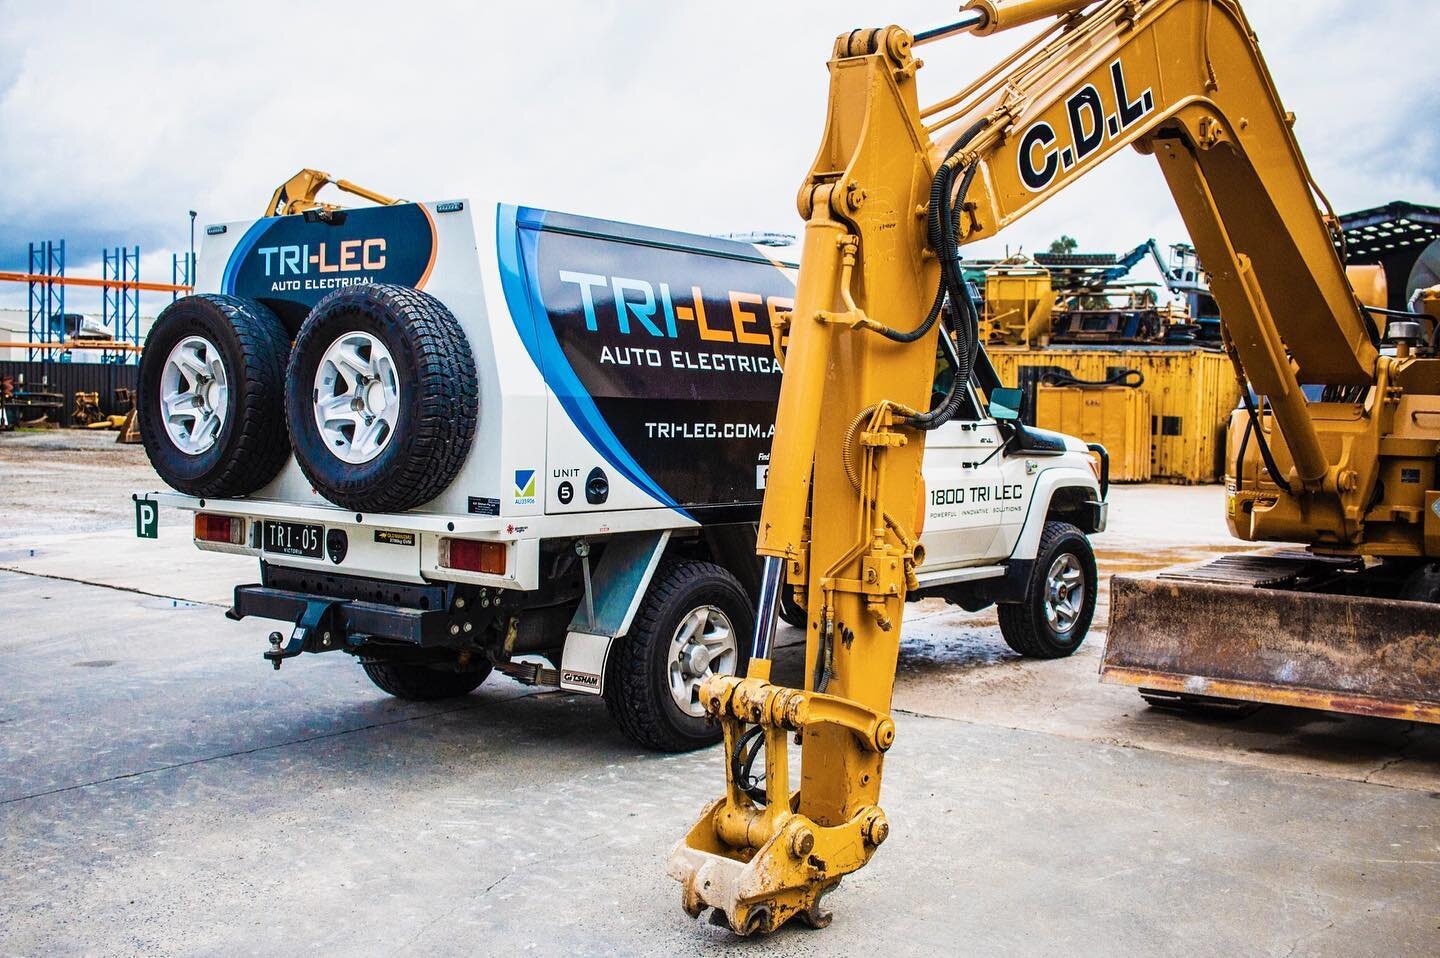 TRI-LEC assists &amp; works along-side many companies. CDL Constructions is one of them! For CDL, we provide on site diagnostics, Installations &amp; repairs + air conditioning maintenance &amp; repairs. Our priority is to ensure all down time is kep